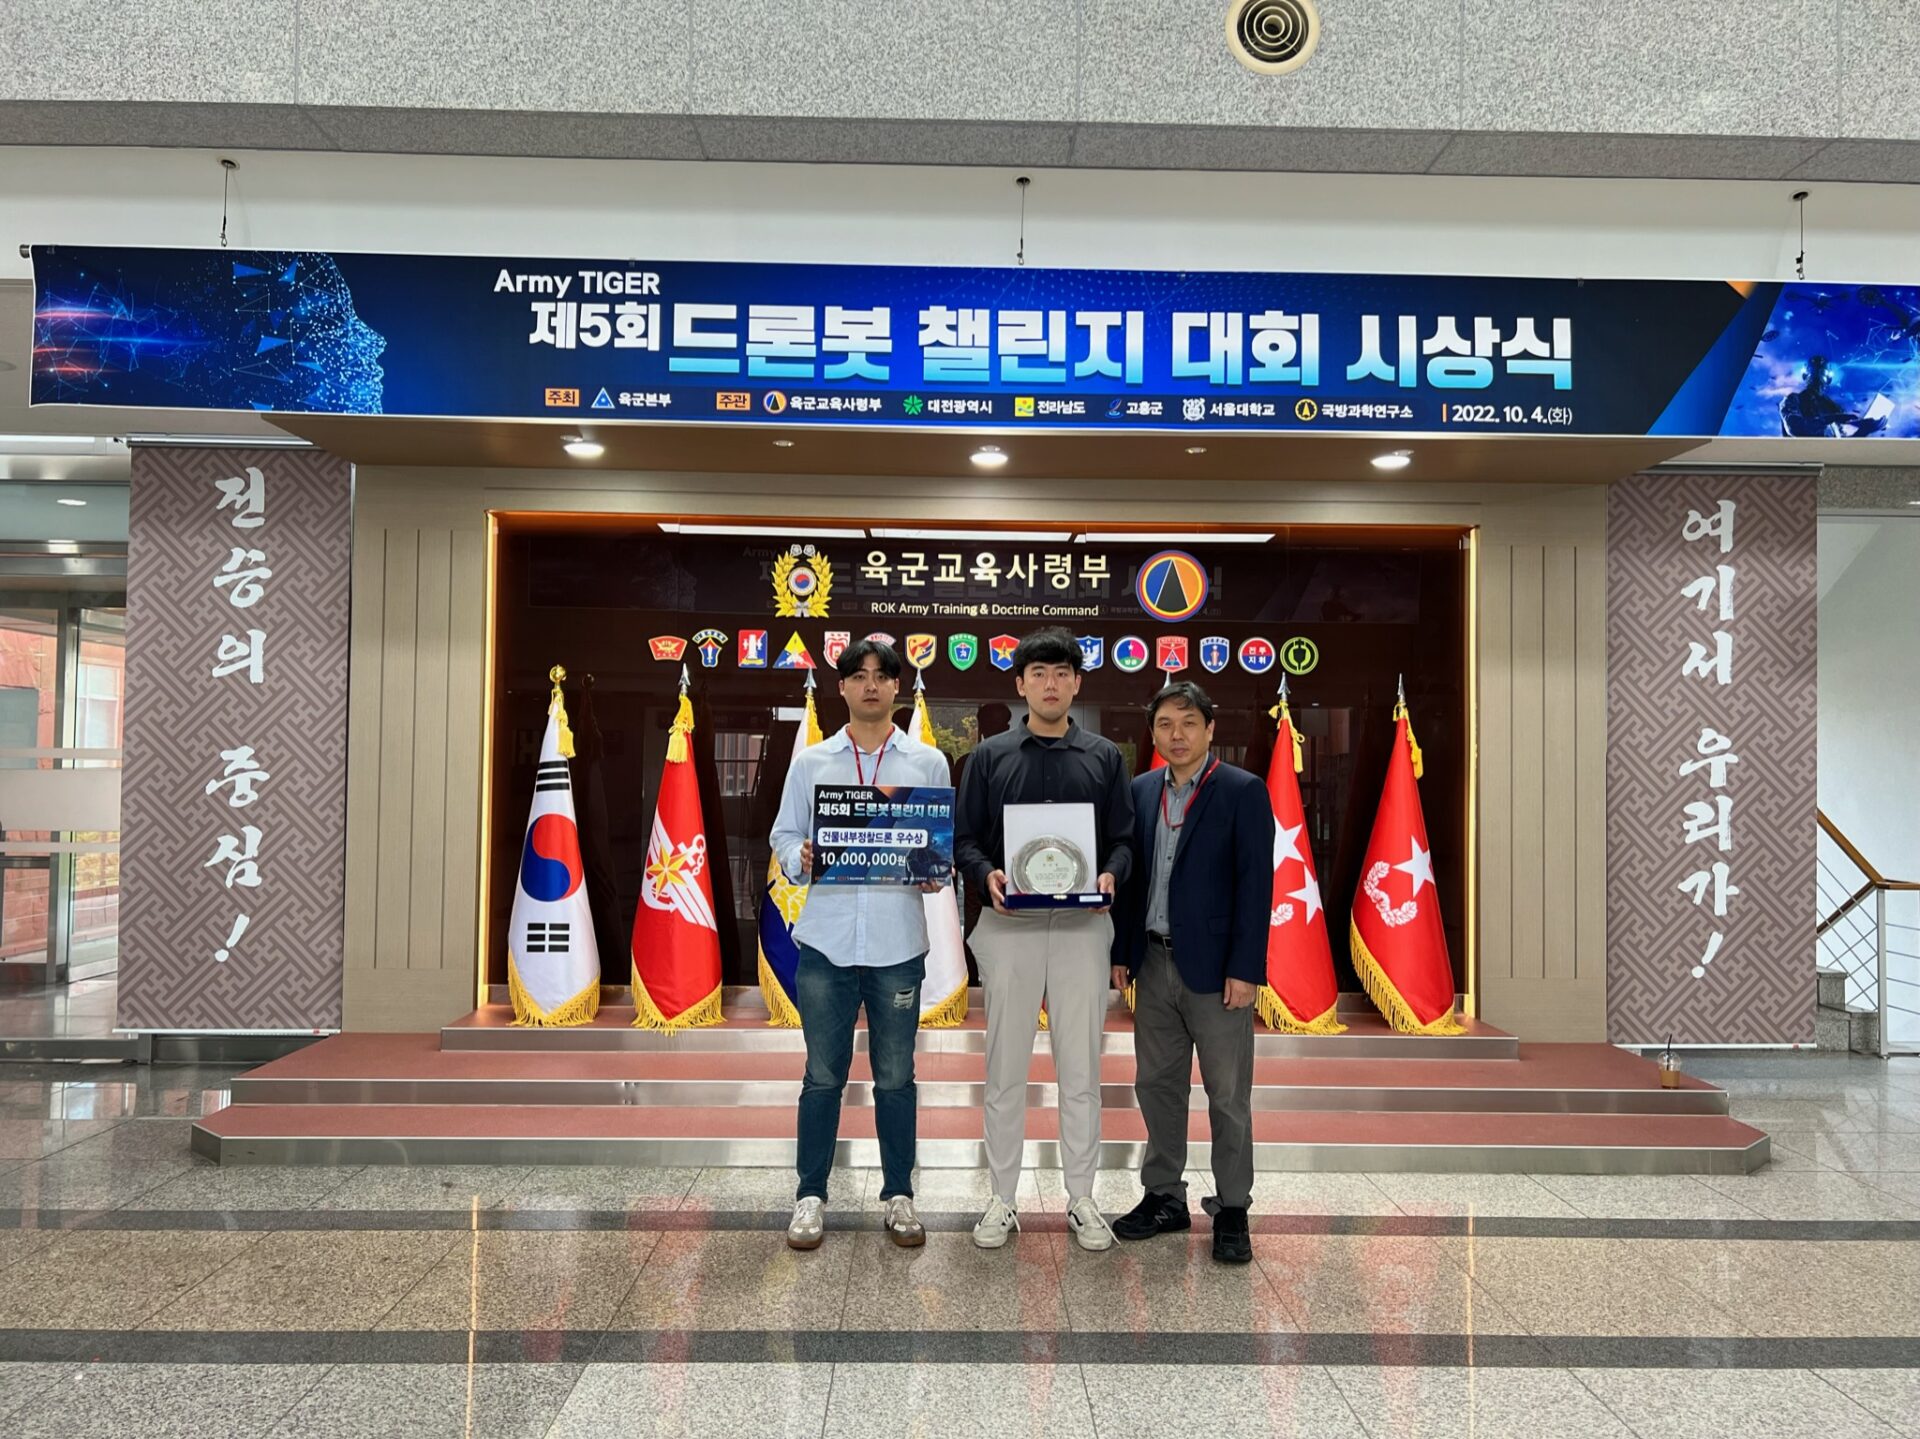 EE Prof. Hyuncheol Shim’s team won 1st place in 5th Army Tiger DroneBot Mission Challenge